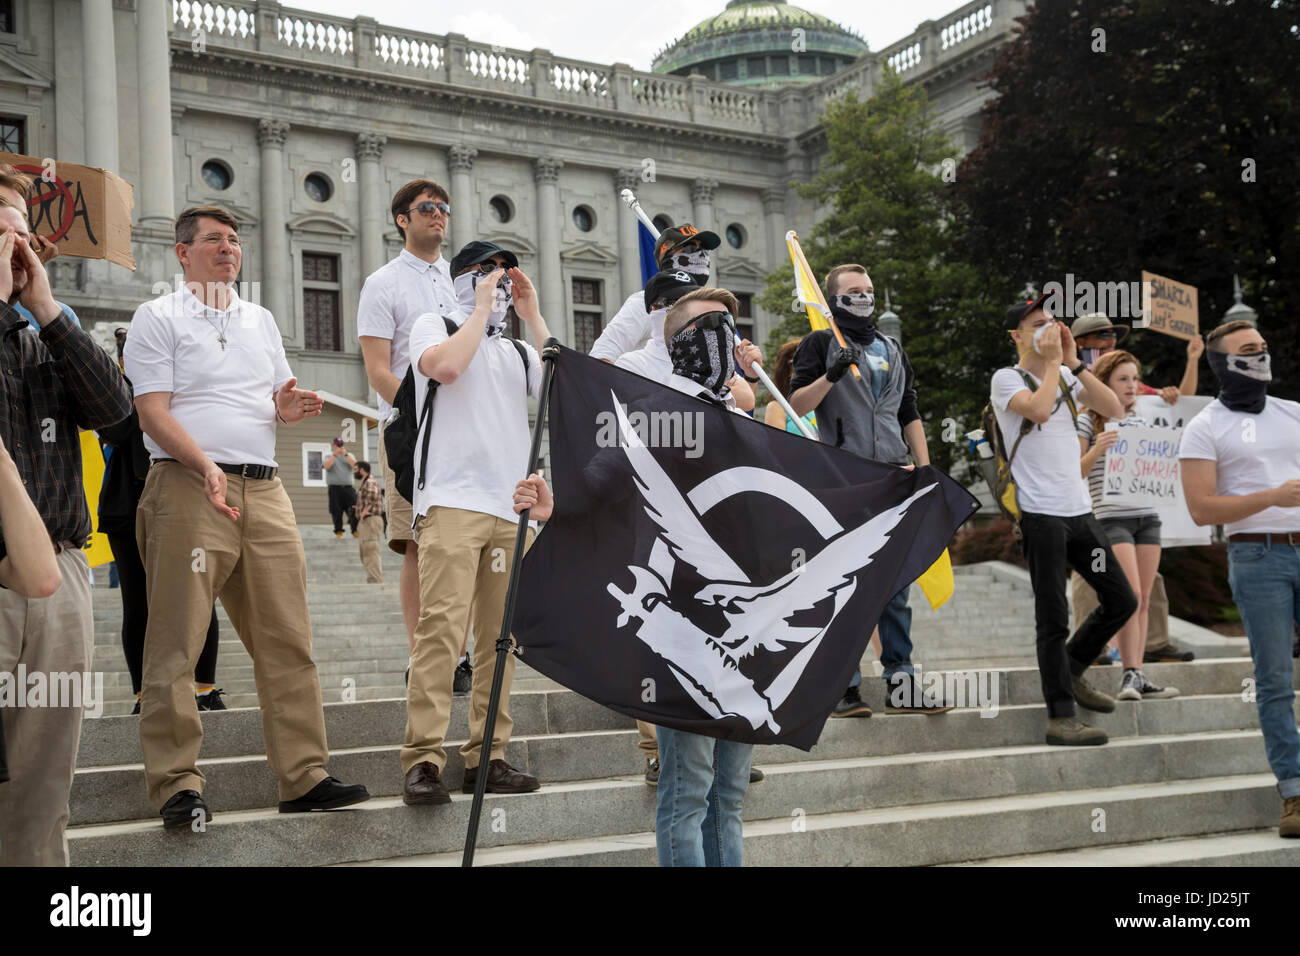 Harrisburg, Pennsylvania - Members of Vanguard America, many of them wearing masks, joined an anti-Sharia, anti-Muslim rally called by ACT for America Stock Photo